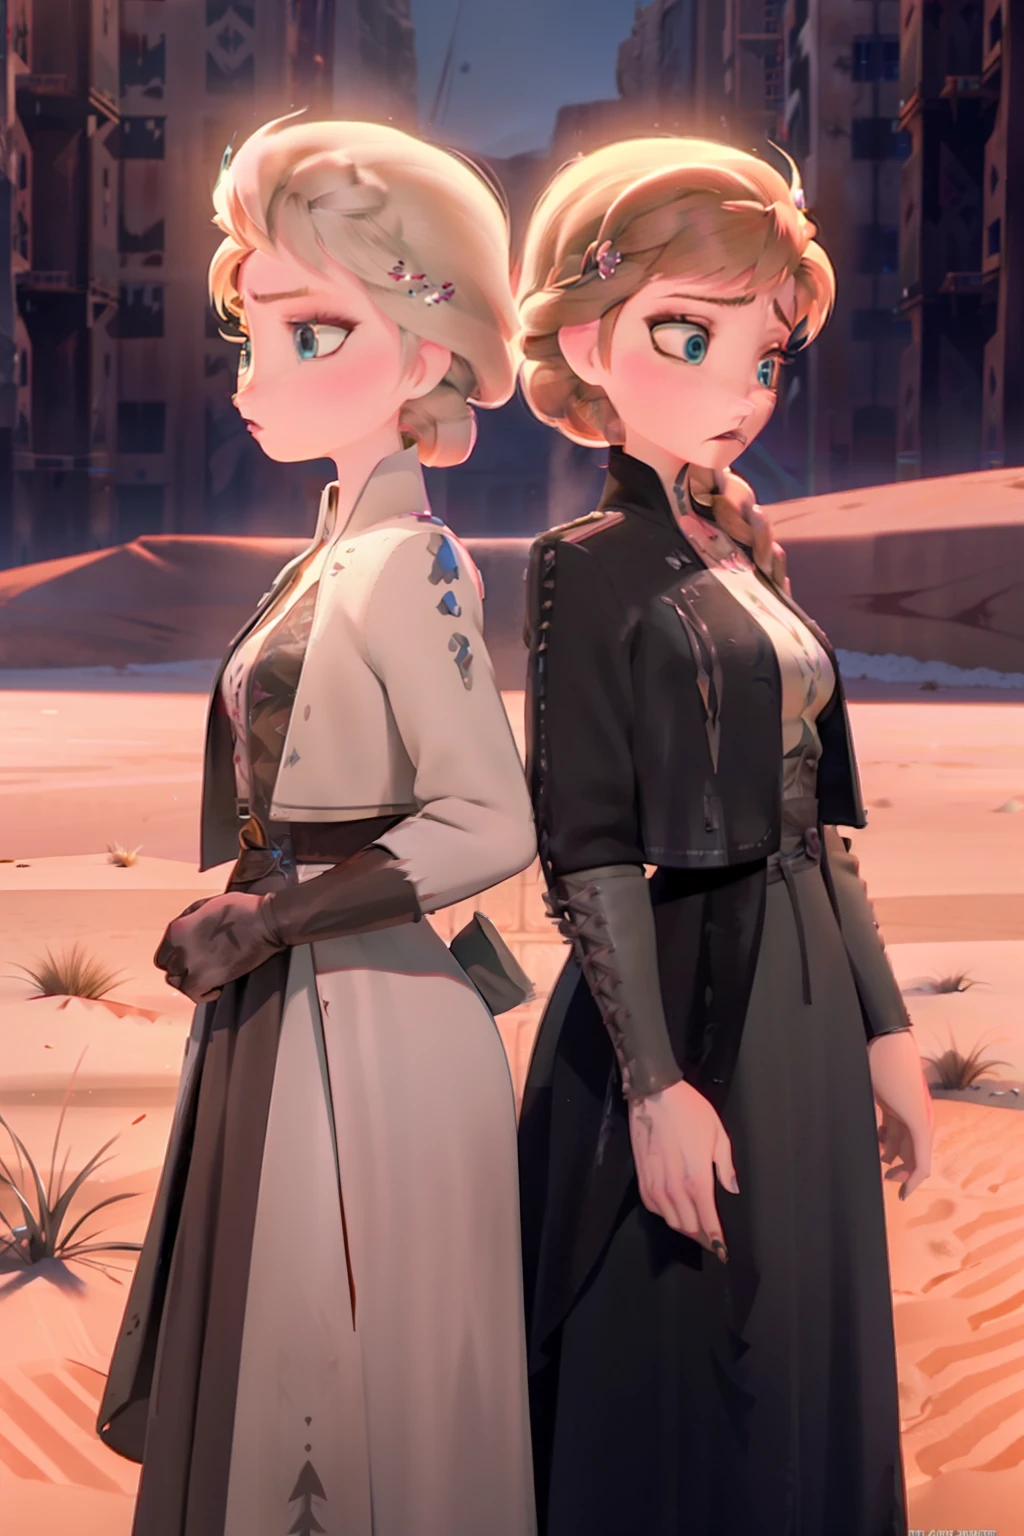 Elsa and Anna, post apocalyptic, two women, Elsa standing next to Anna, sisters,  desert, mad max, scarred, Post apocalyptic desert wasteland, Mad max, ear piercing, nose ring, gothy, torn clothes, Long jacket, scarrred, scarred, scarred, bruised, beat up, scarred